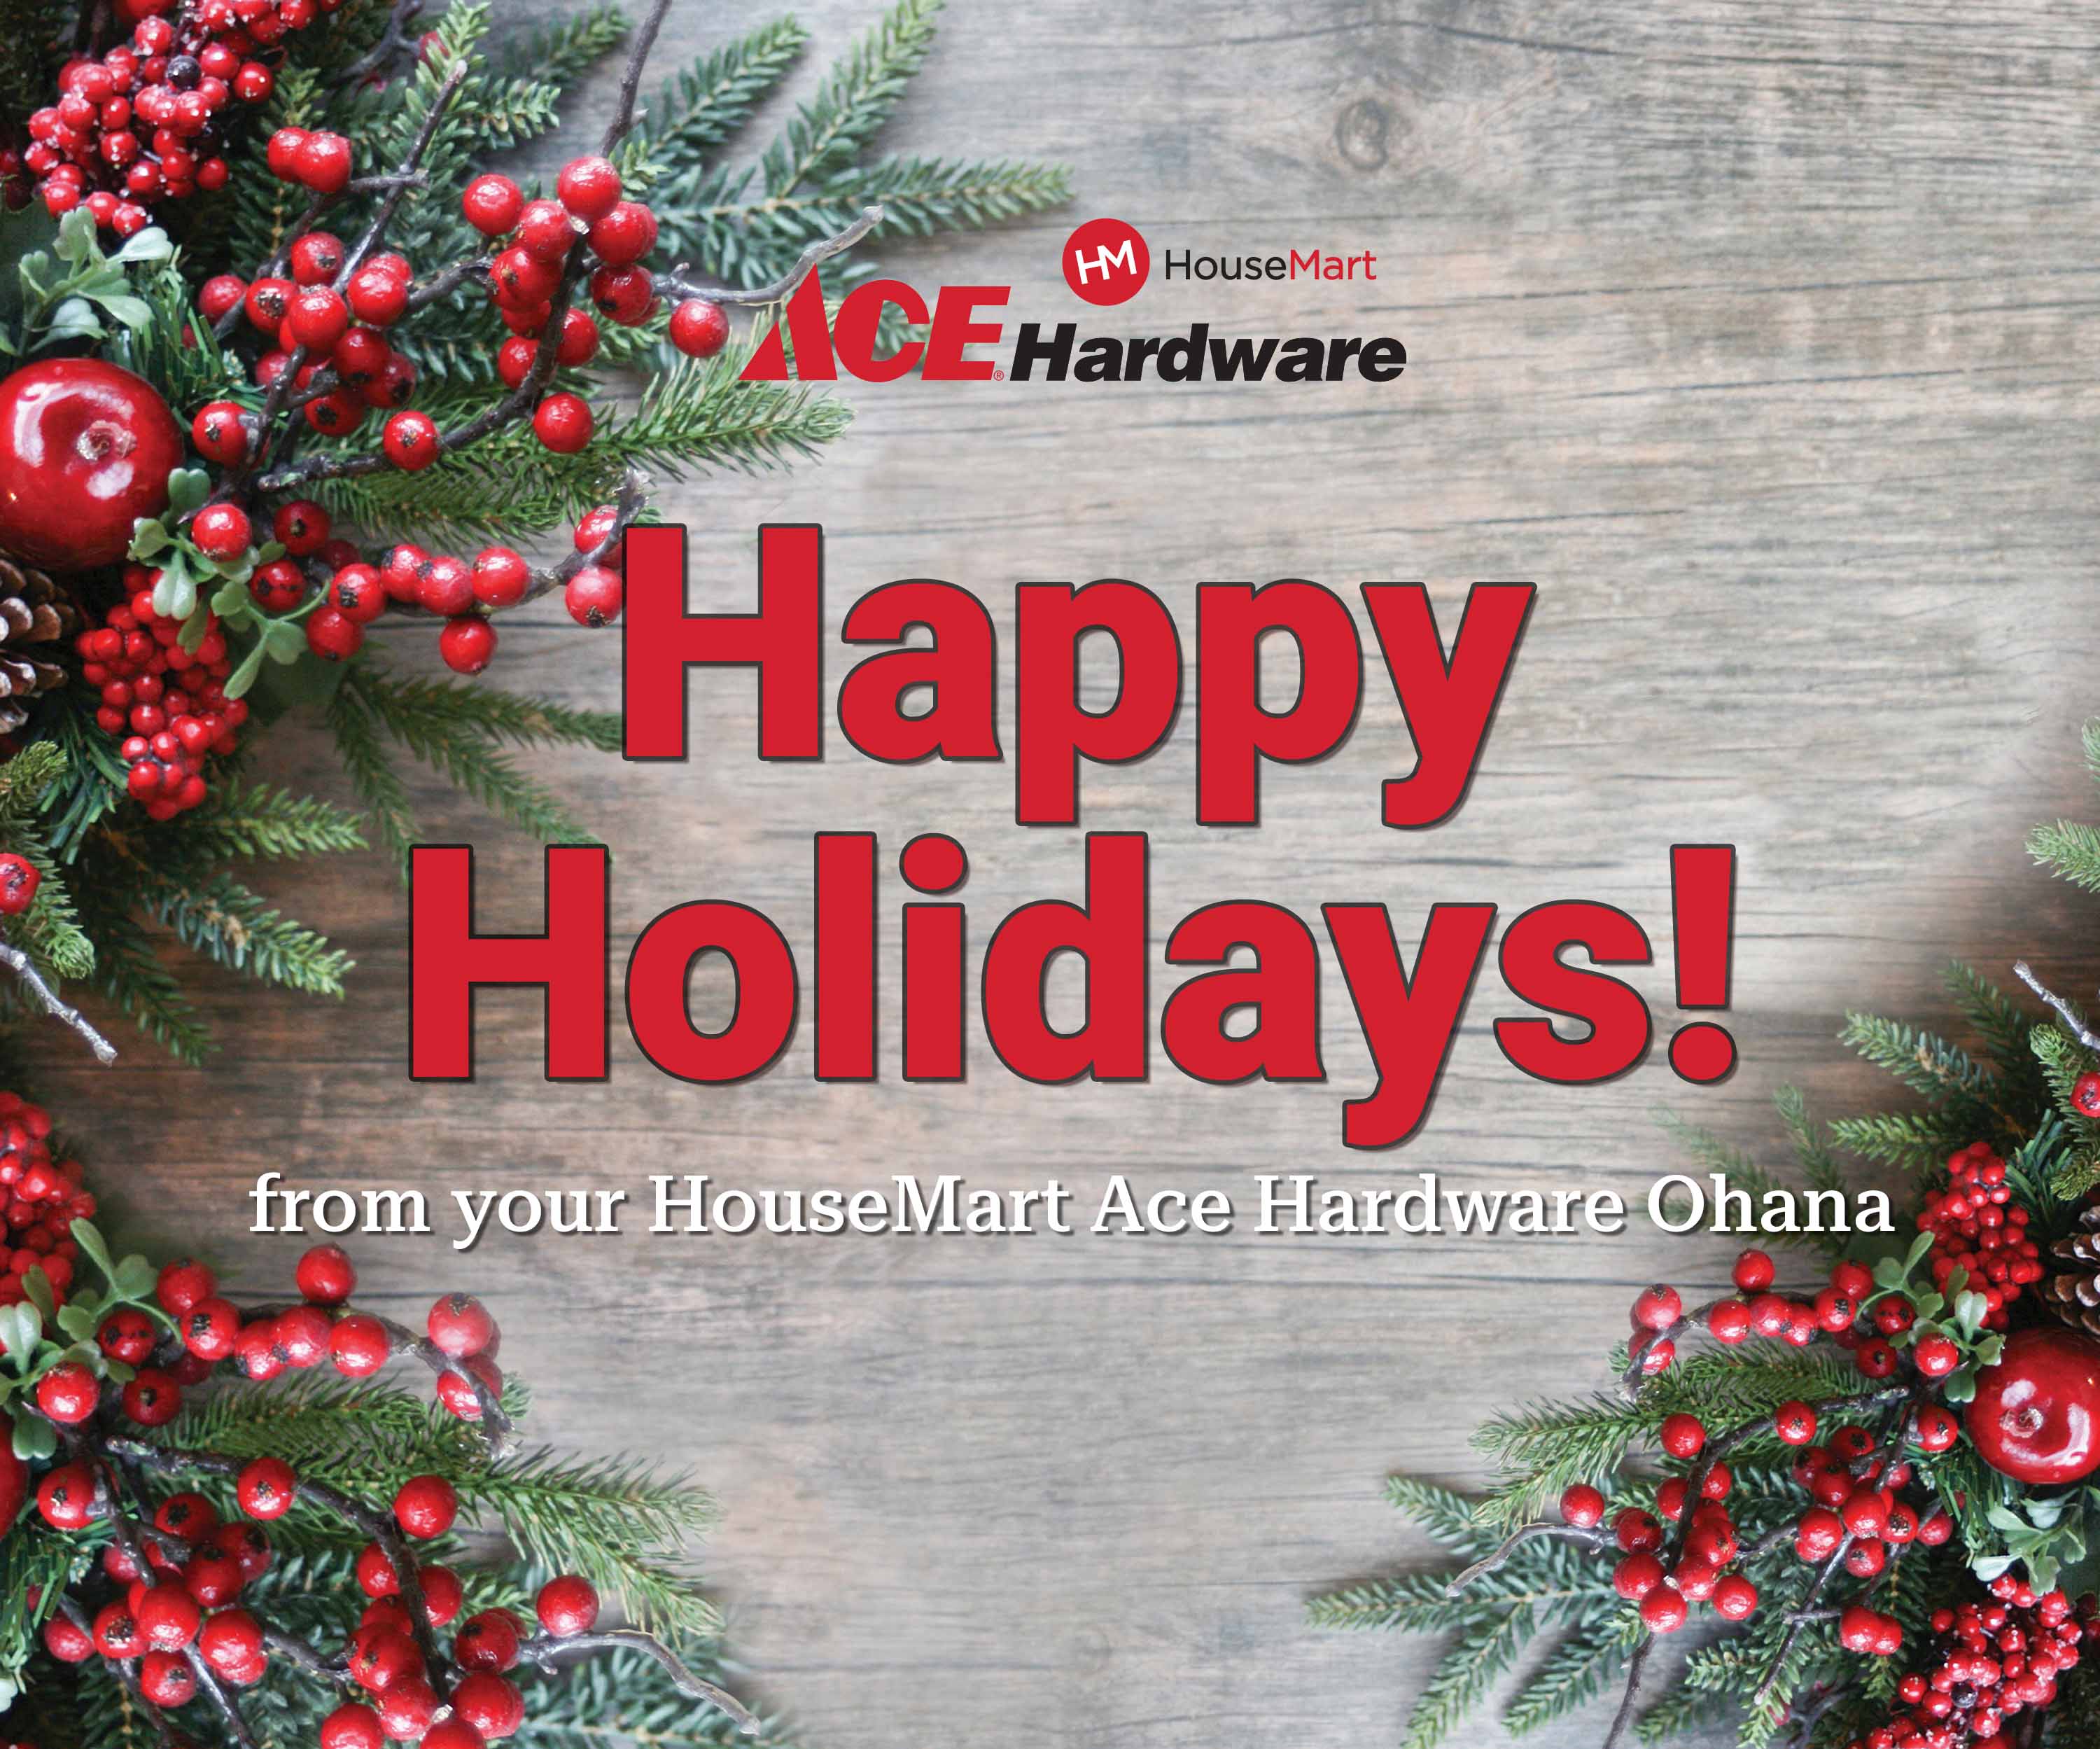 Wishing you all a Happy and Safe Holiday Season!